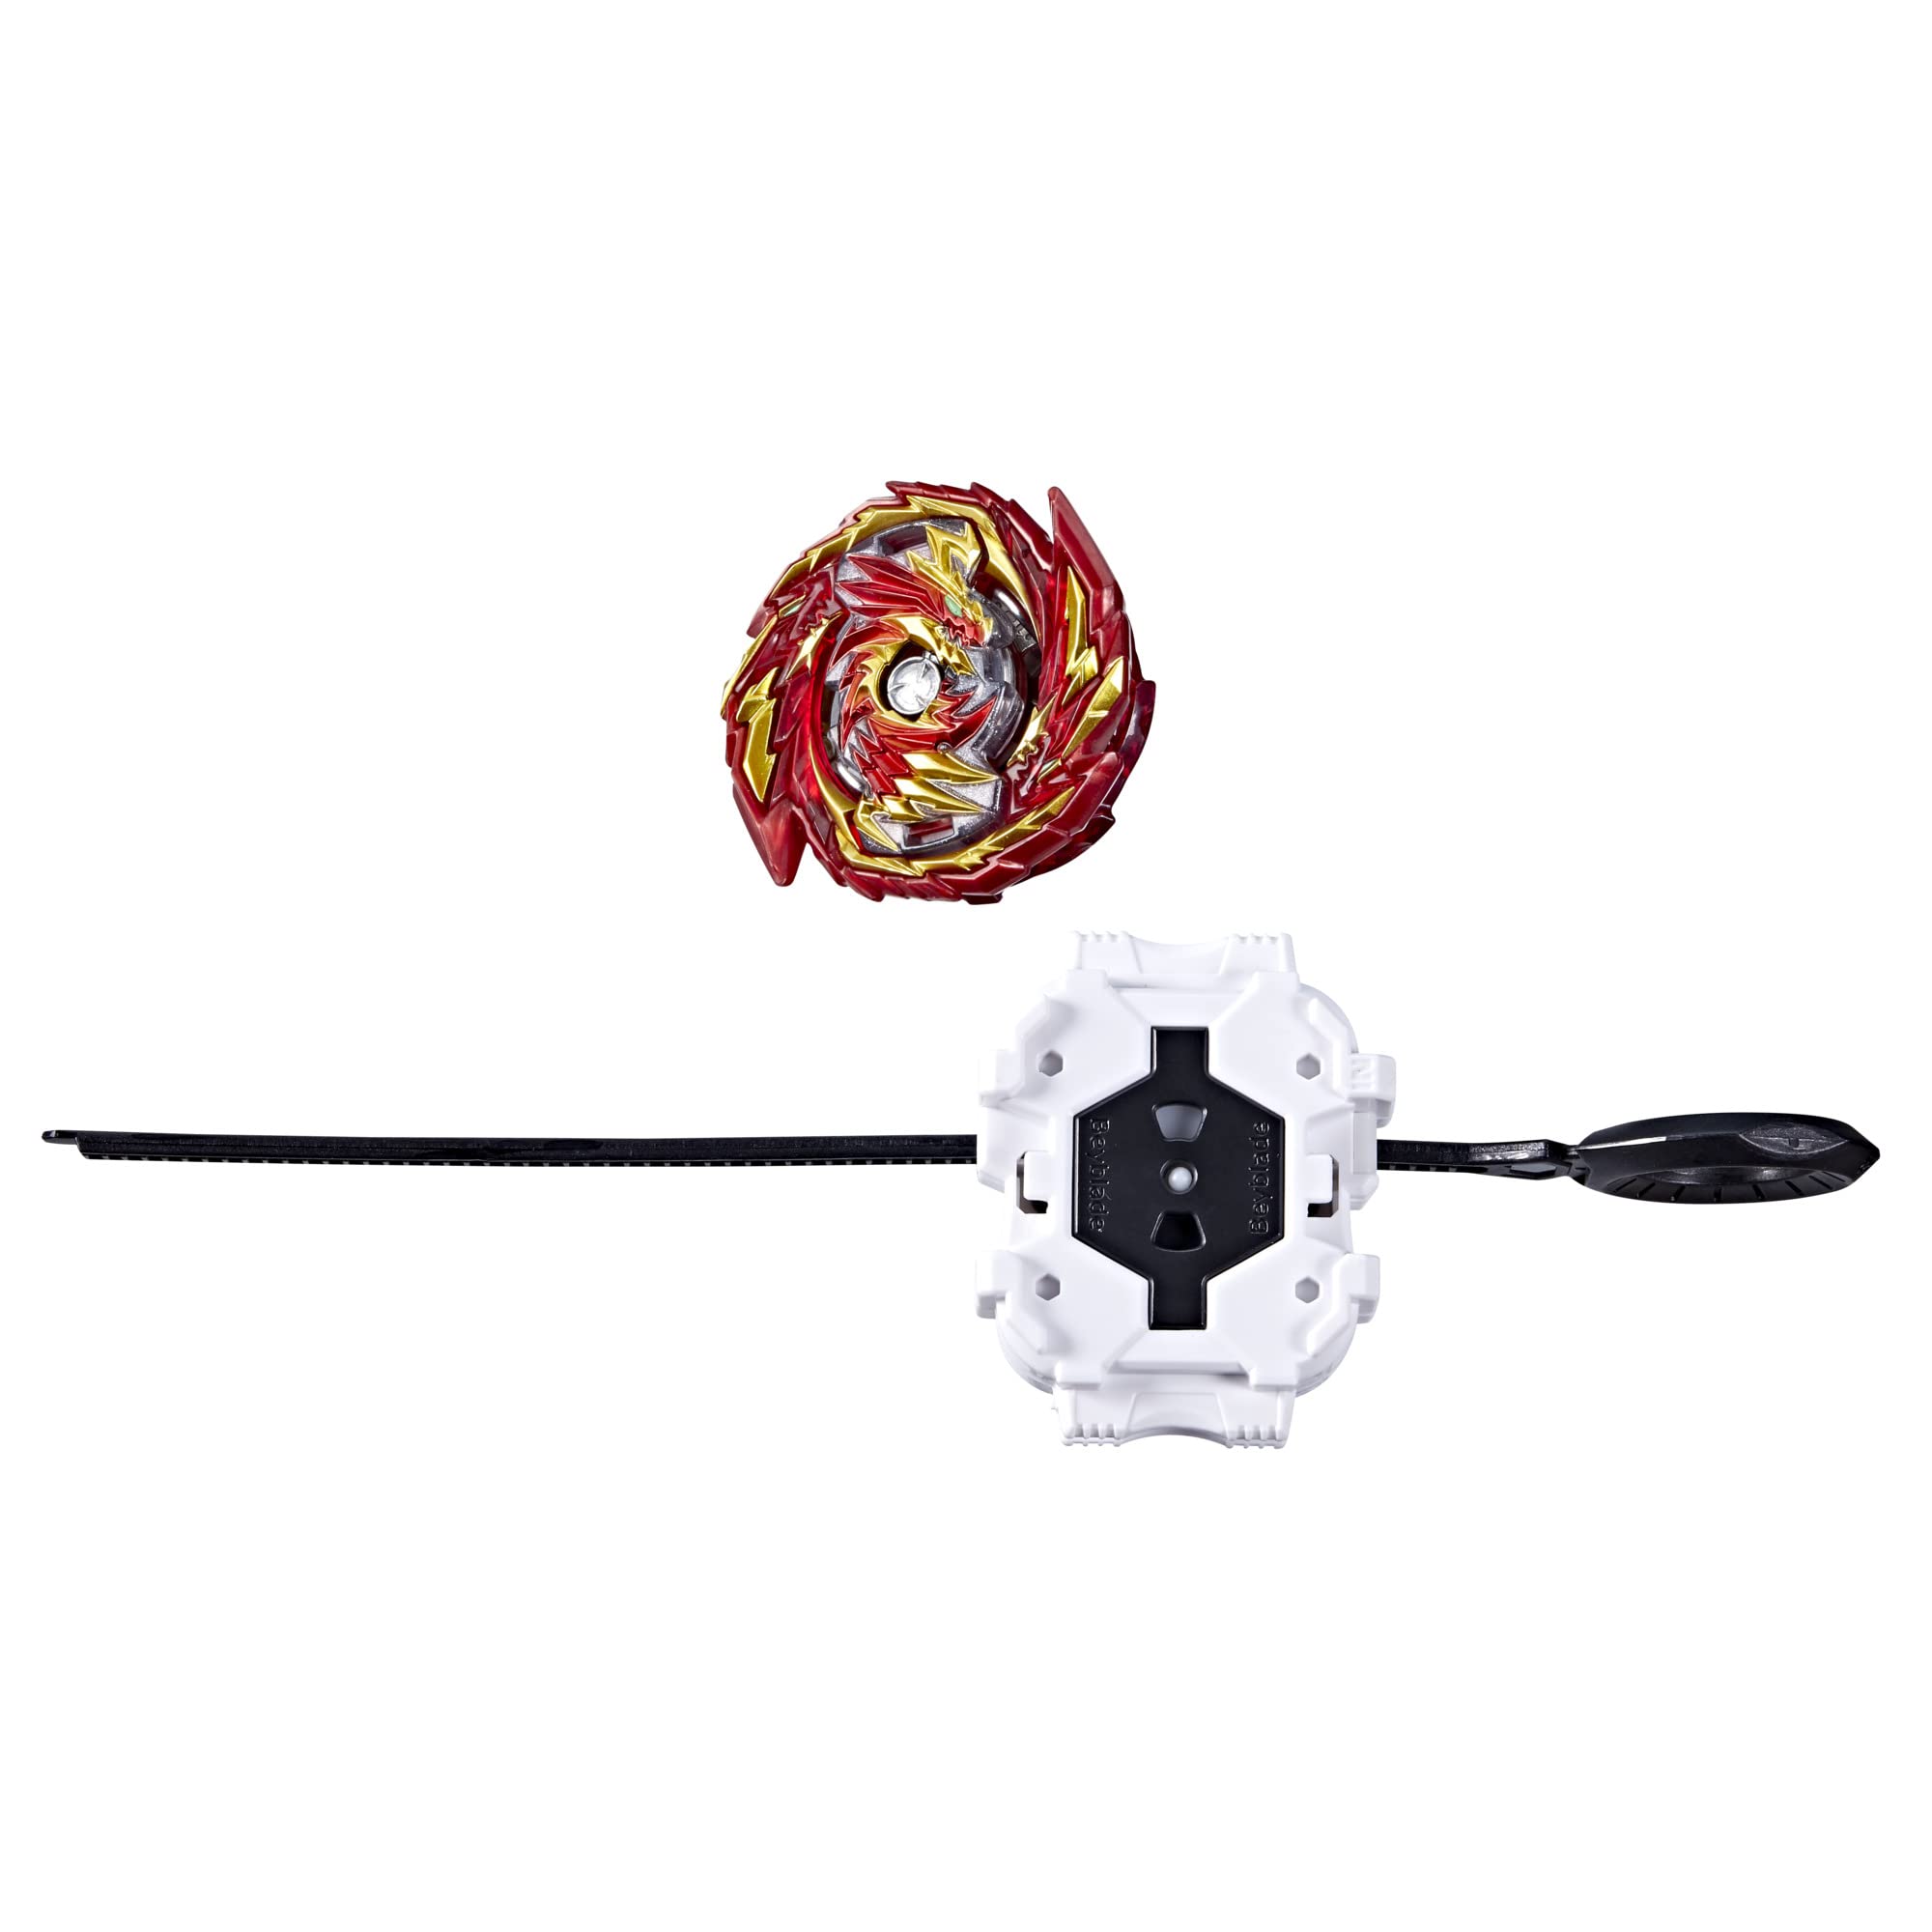 BEYBLADE Burst Pro Series Master Devolos Spinning Top Starter Pack - Balance Type Battling Game Top with Launcher Toy